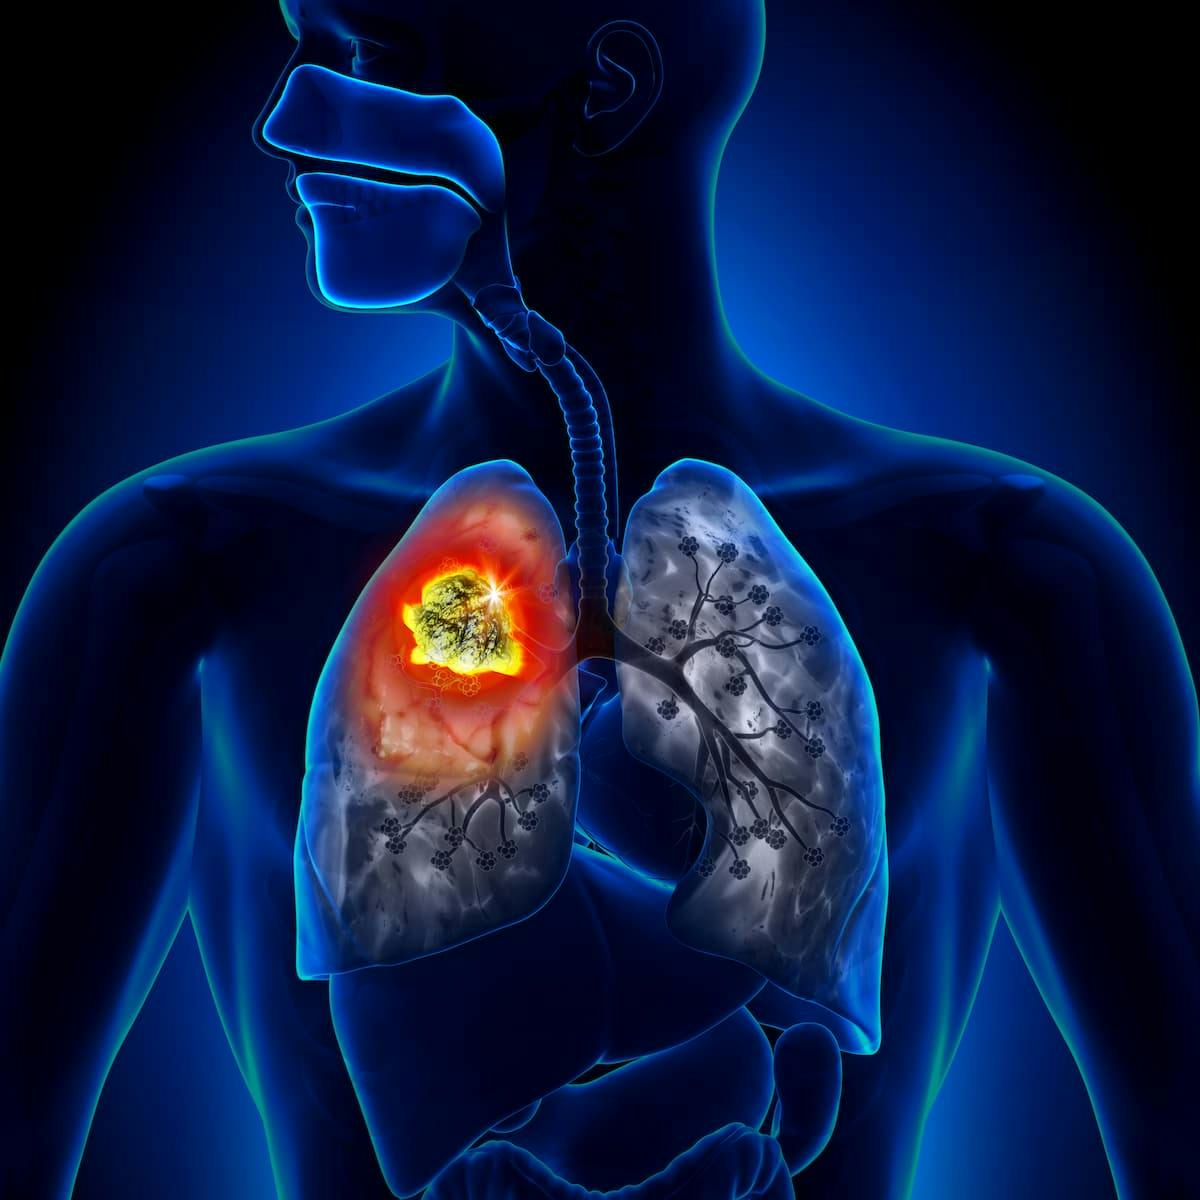 “These results represent a major advance for patients with stage III EGFR-mutated lung cancer who have a high propensity for early progression and spread to the brain, and where no targeted therapy is available," according to Suresh S. Ramalingam, MD, FACP, FASCO.